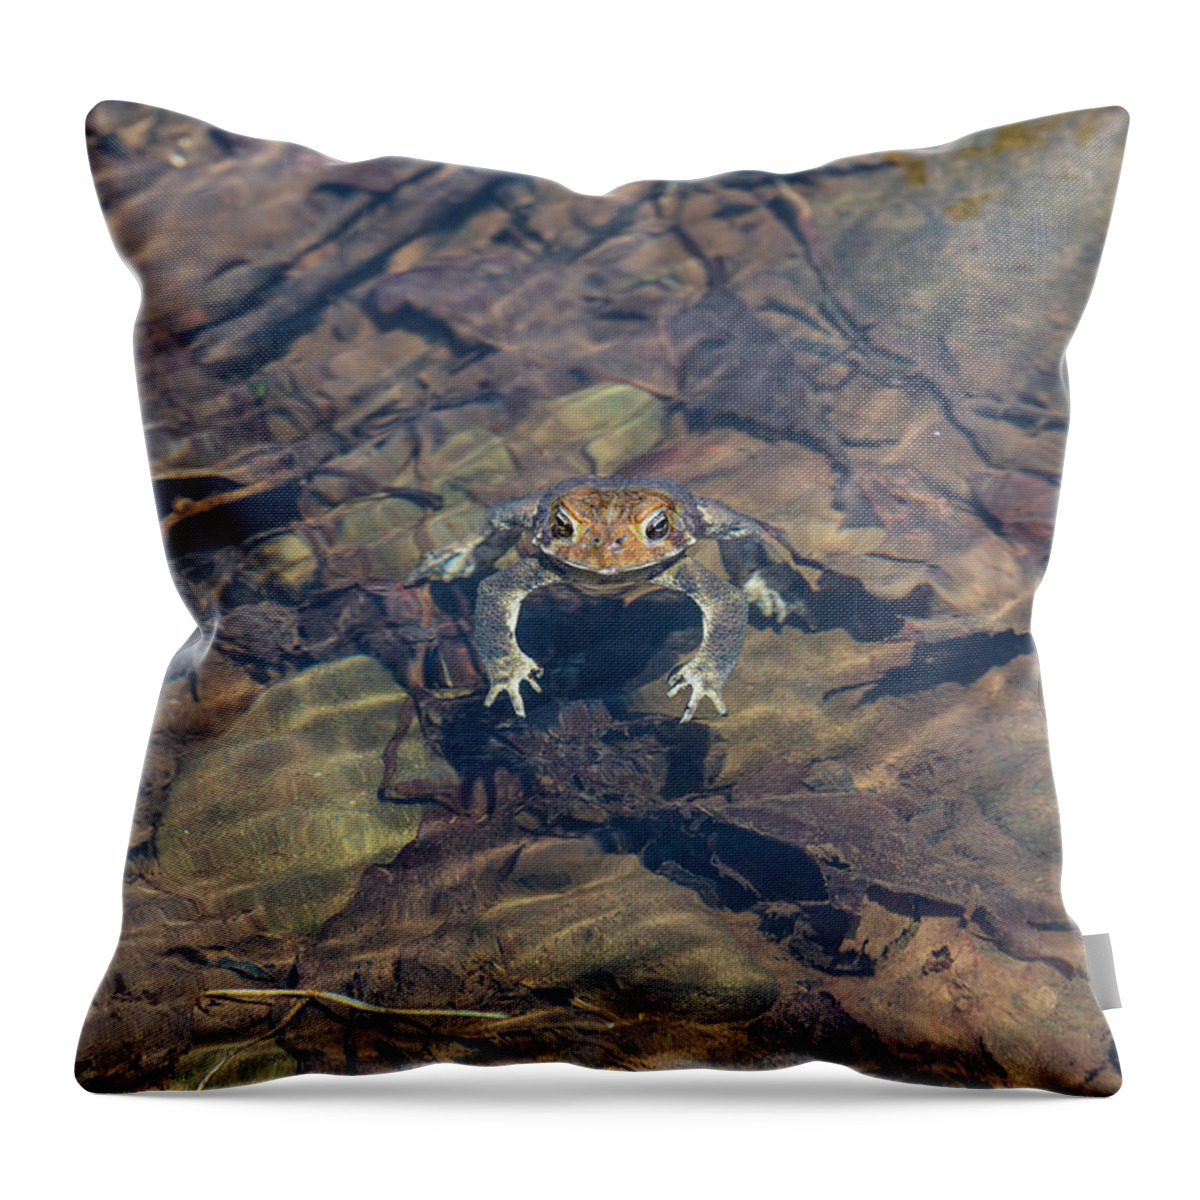 Frog Throw Pillow featuring the photograph Toad In Water by Amelia Pearn